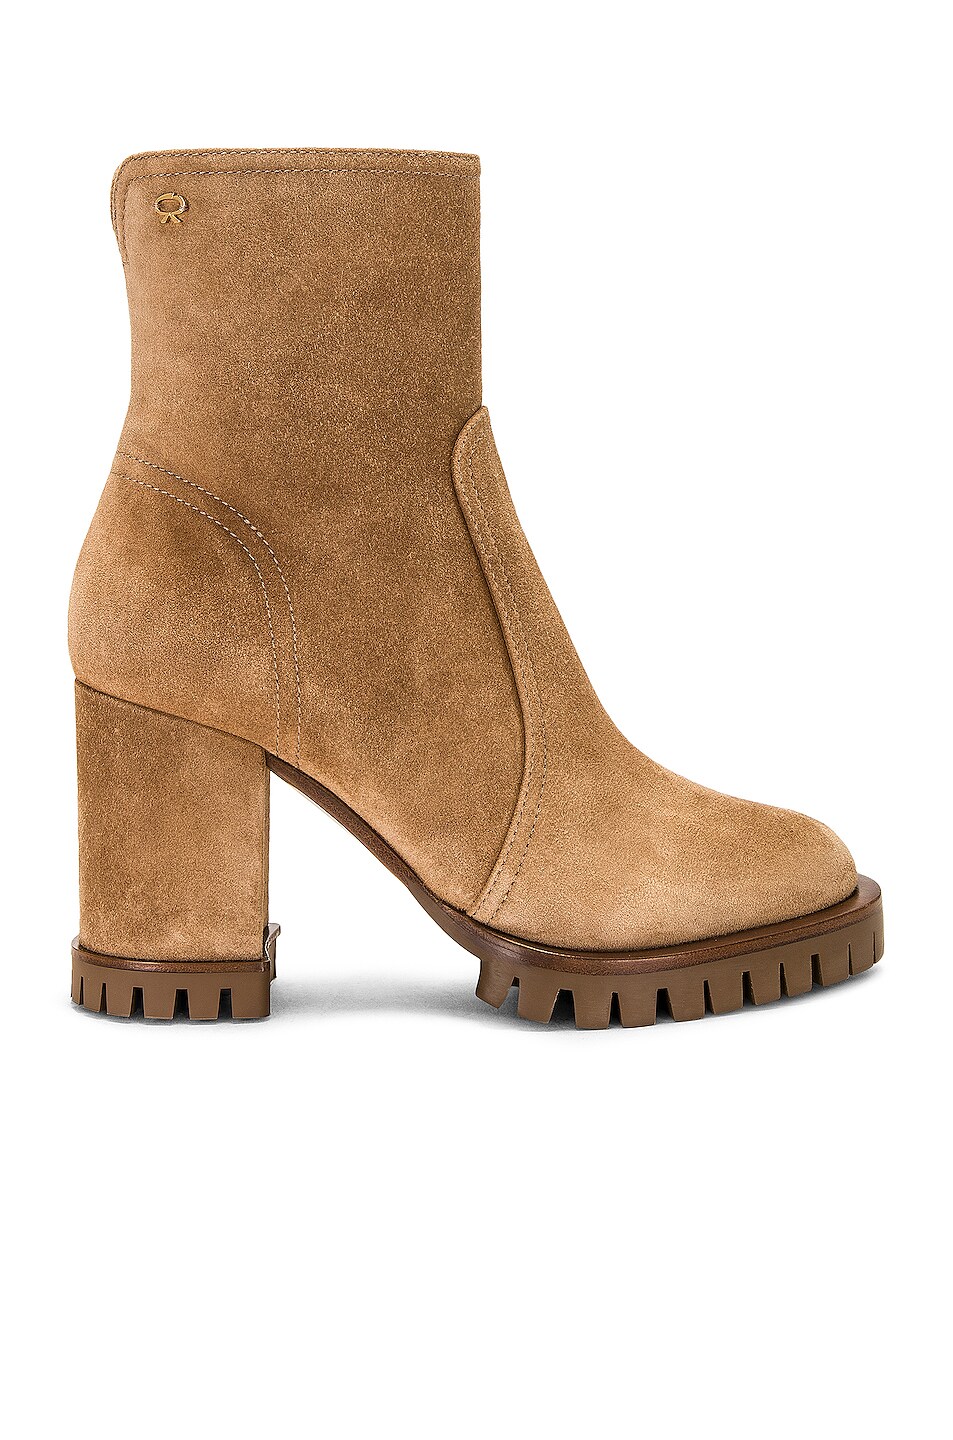 Image 1 of Gianvito Rossi Timber Camoscio Stivale Boots in Camel